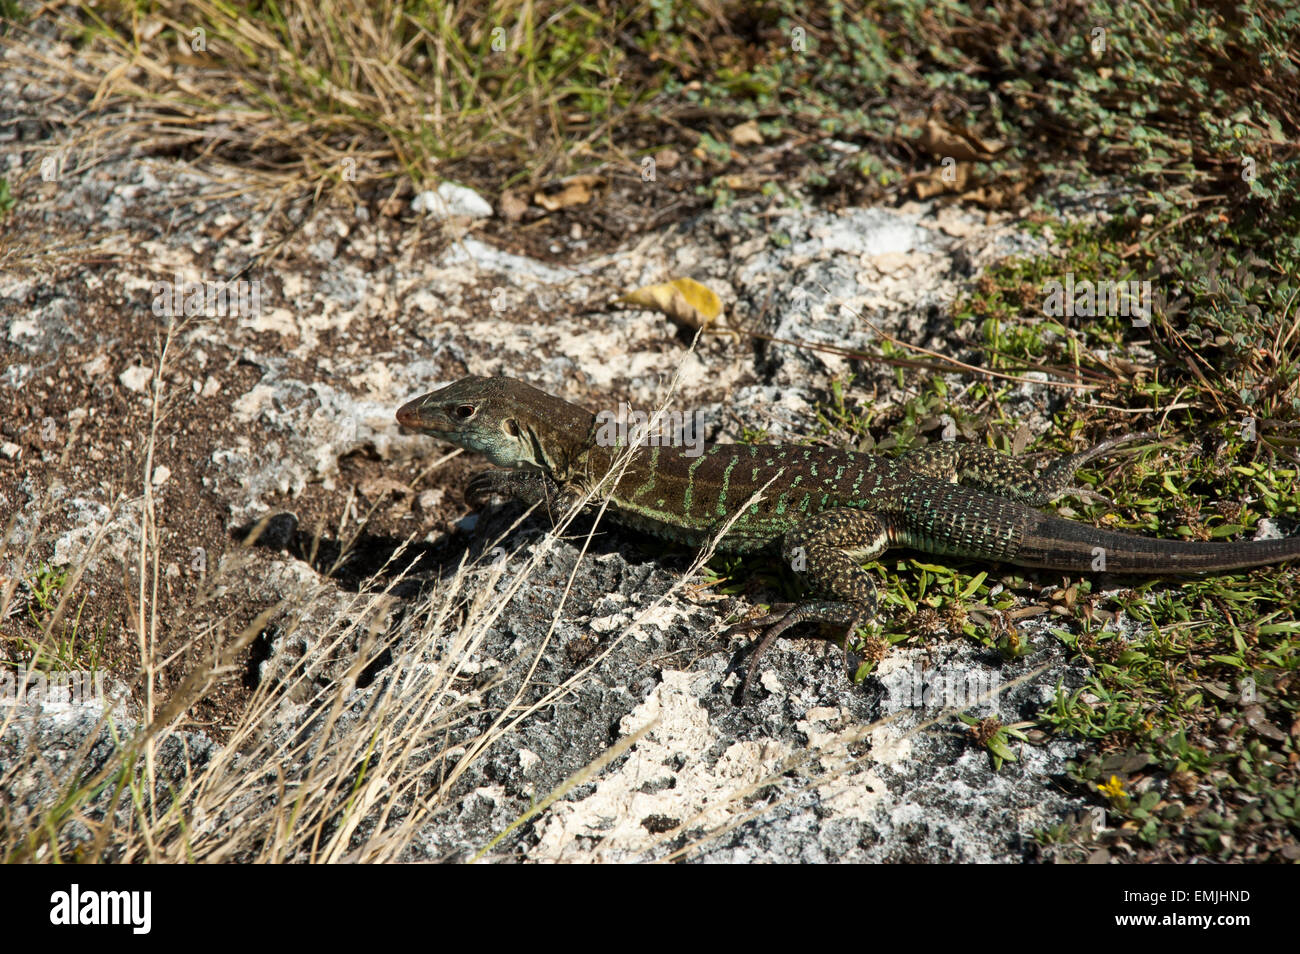 On Great Bird Island off Antiguan coast some Griswold's Ameiva lizards are sunbathing, an endemic lizard to Antigua and Barbuda. Stock Photo